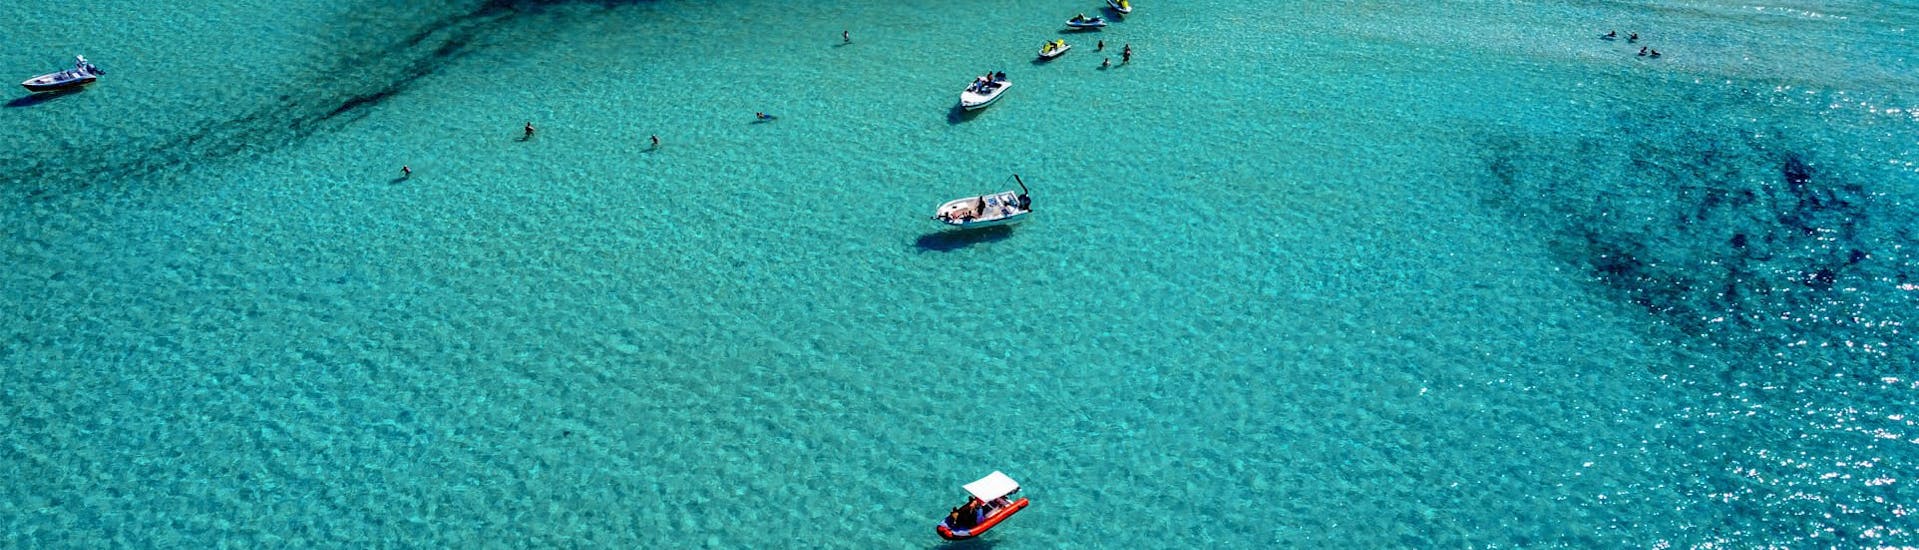 Jet ski and boats in the blue water during Jet ski safari to Balos from Kissamos with Kissamos Sea Sports.